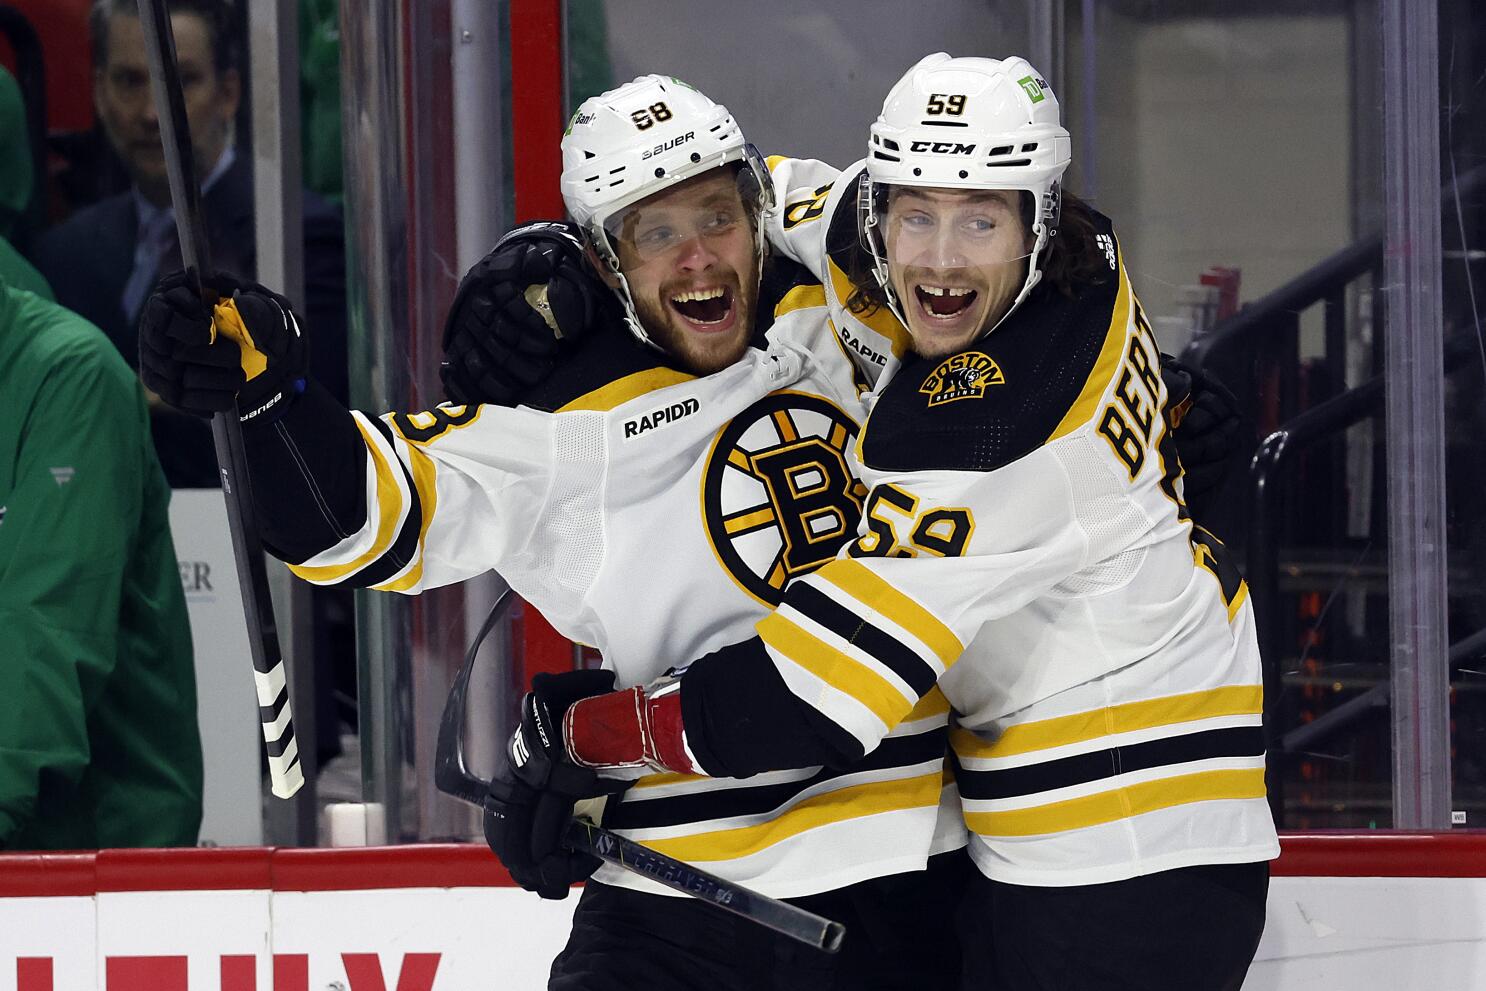 Report: Bruins' DeBrusk willing to work on extension to facilitate